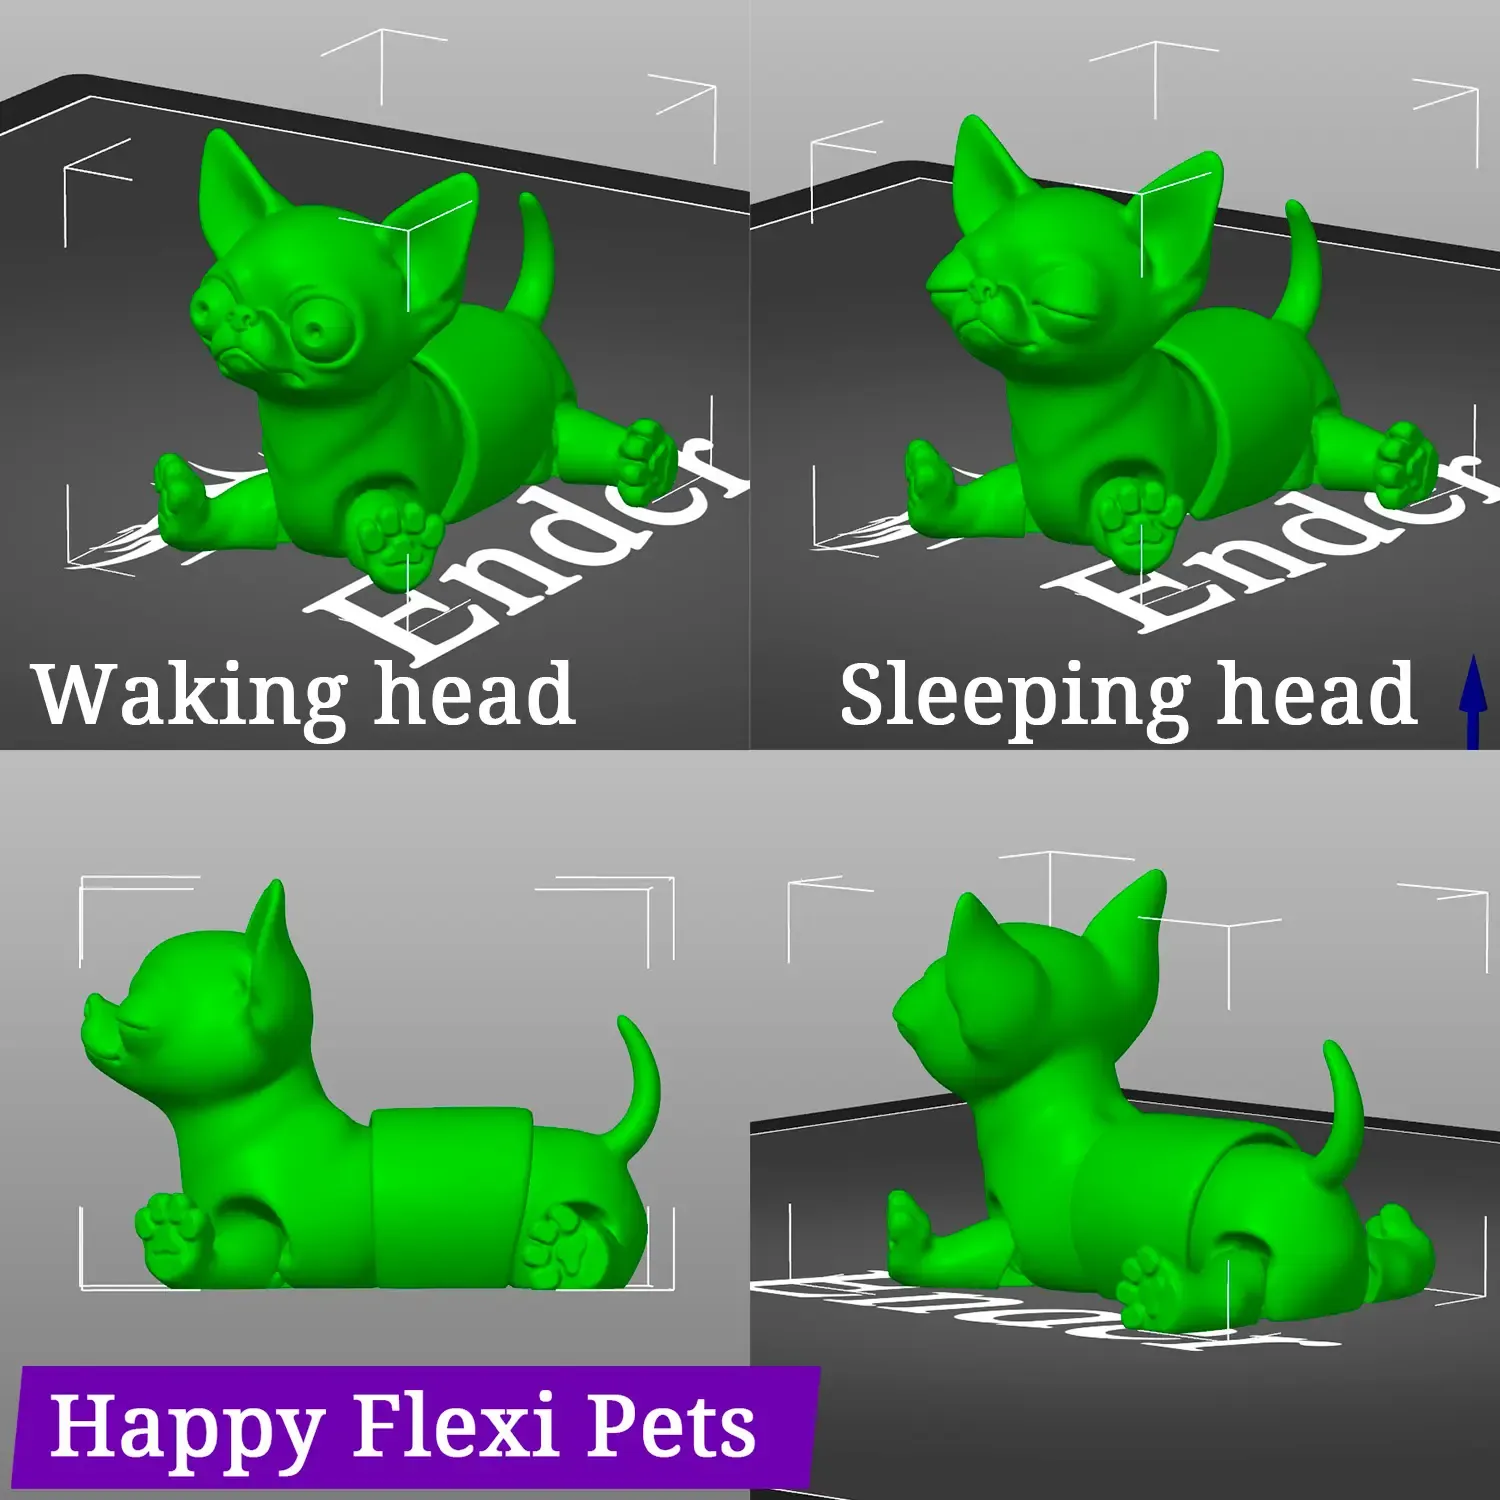 Chihuahua print-in-place articulated flexi dog